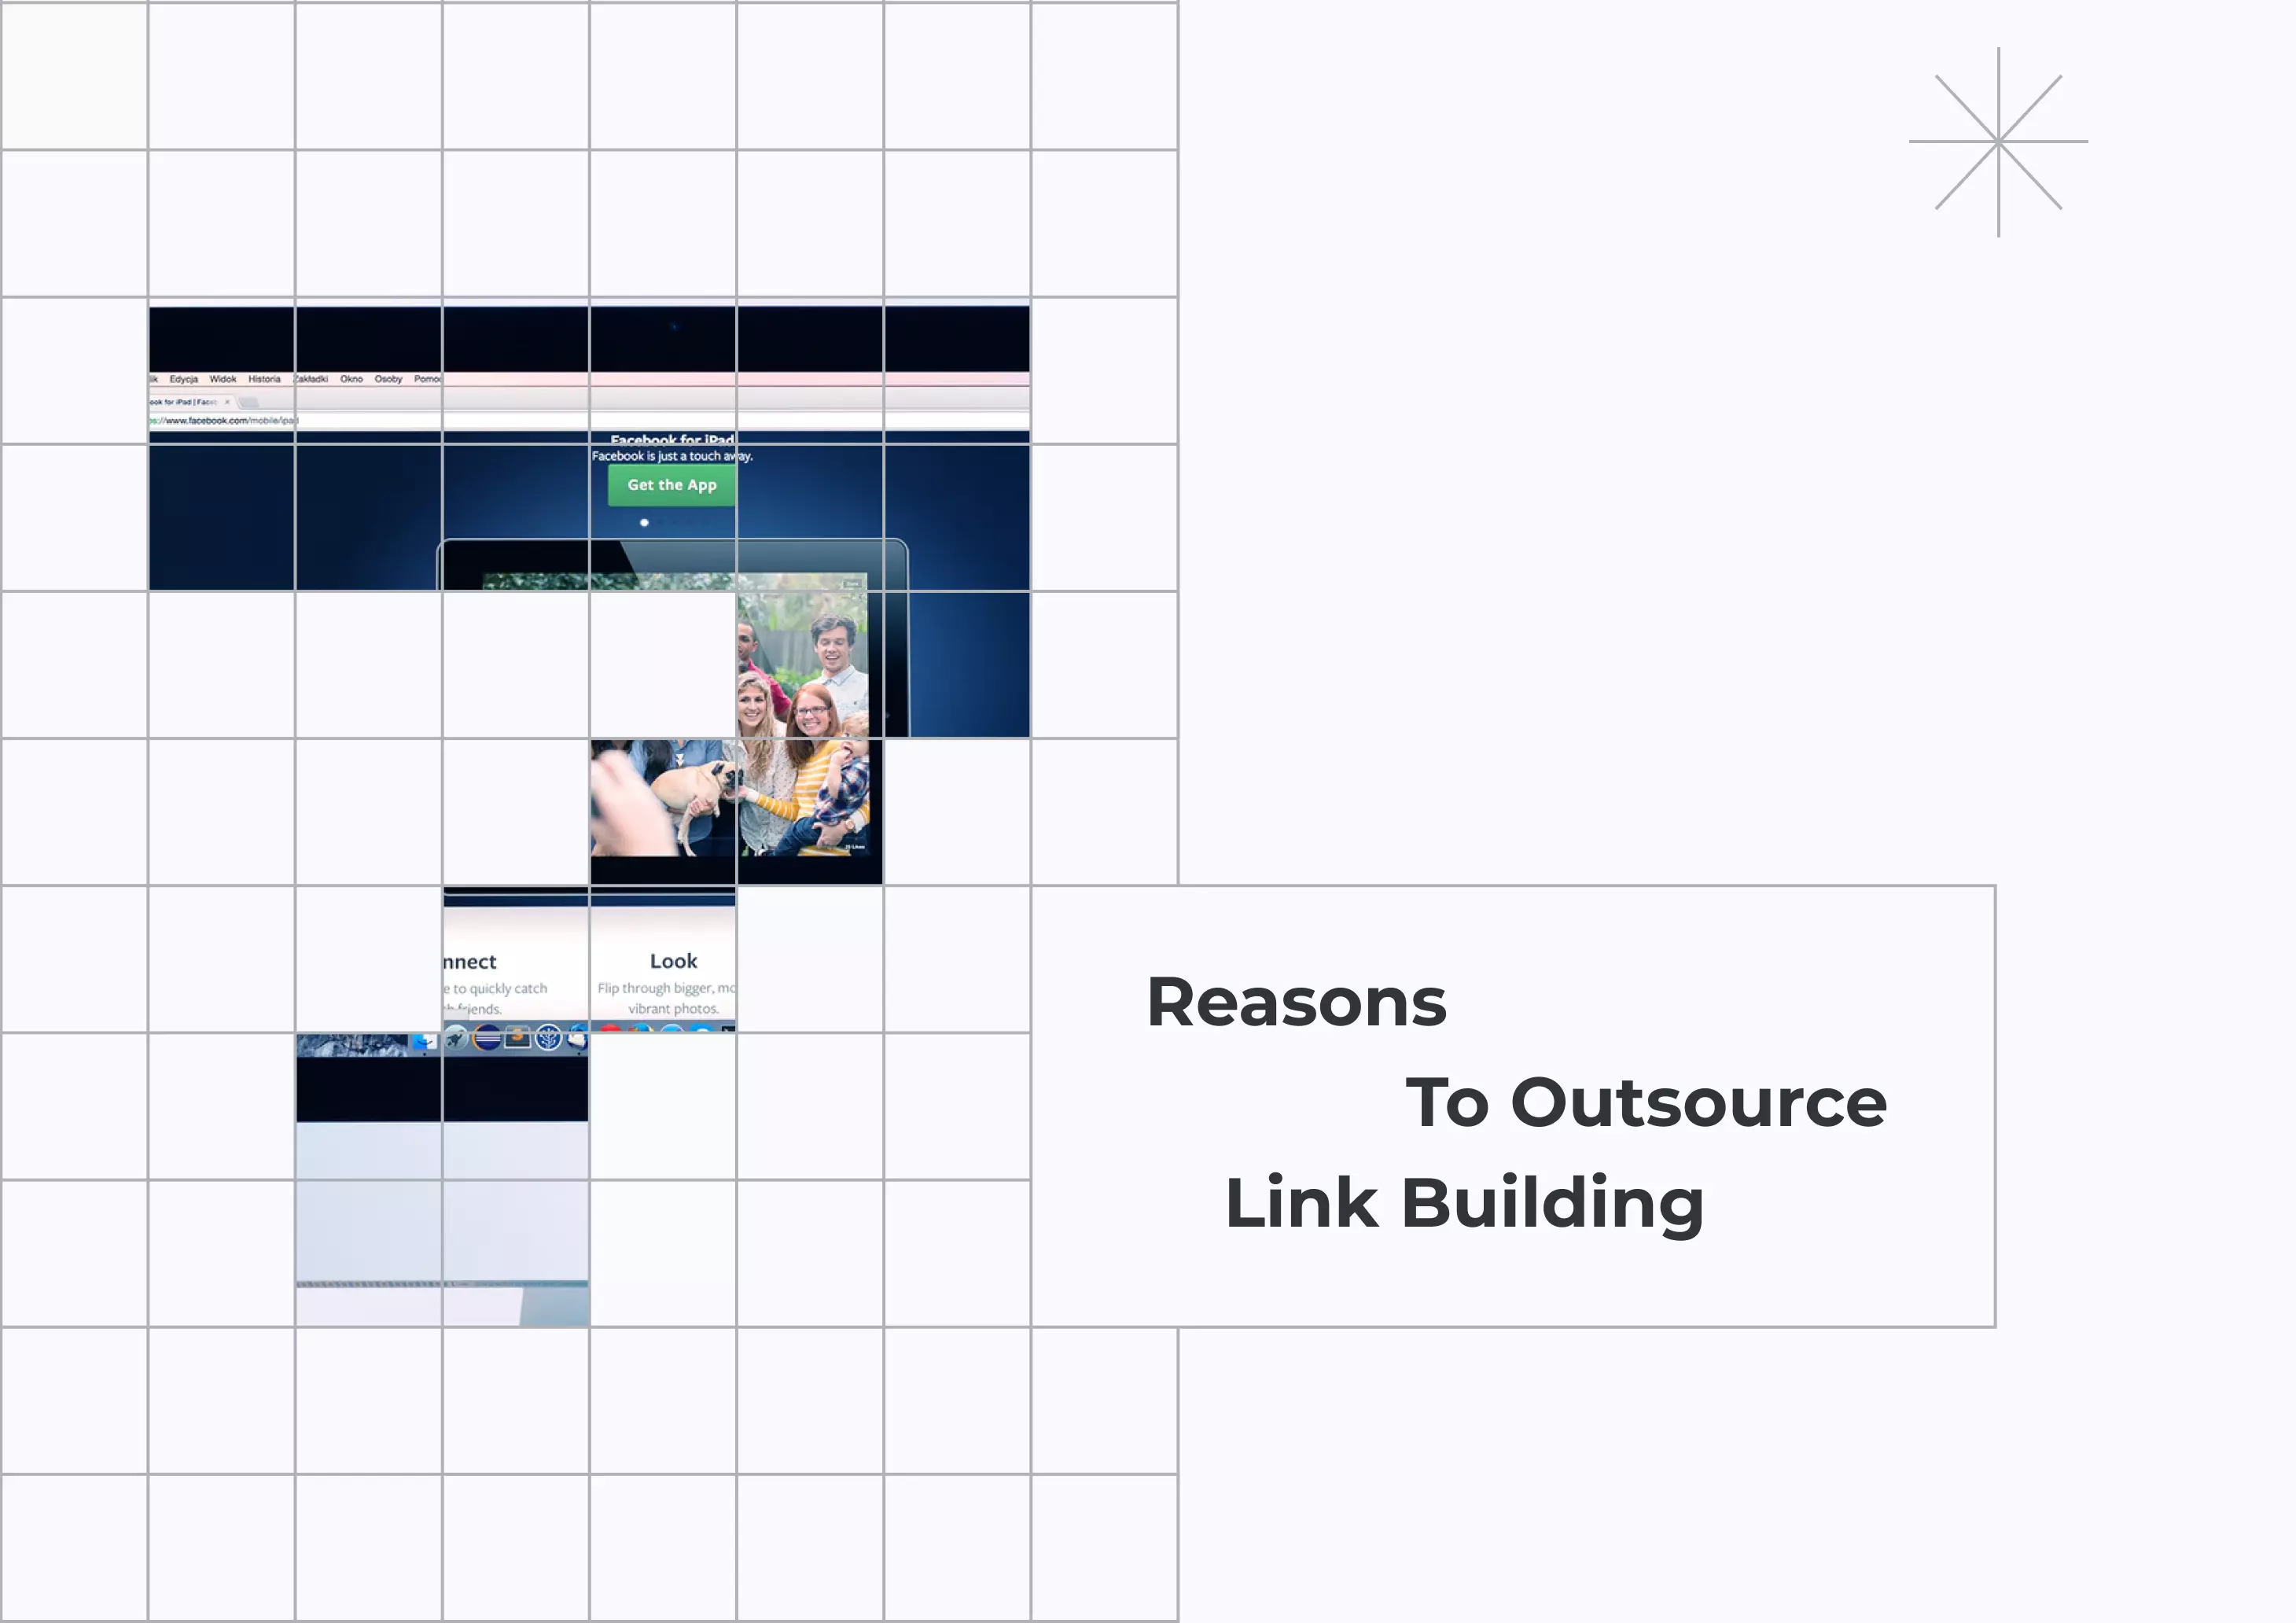 7 Reasons To Outsource Link Building